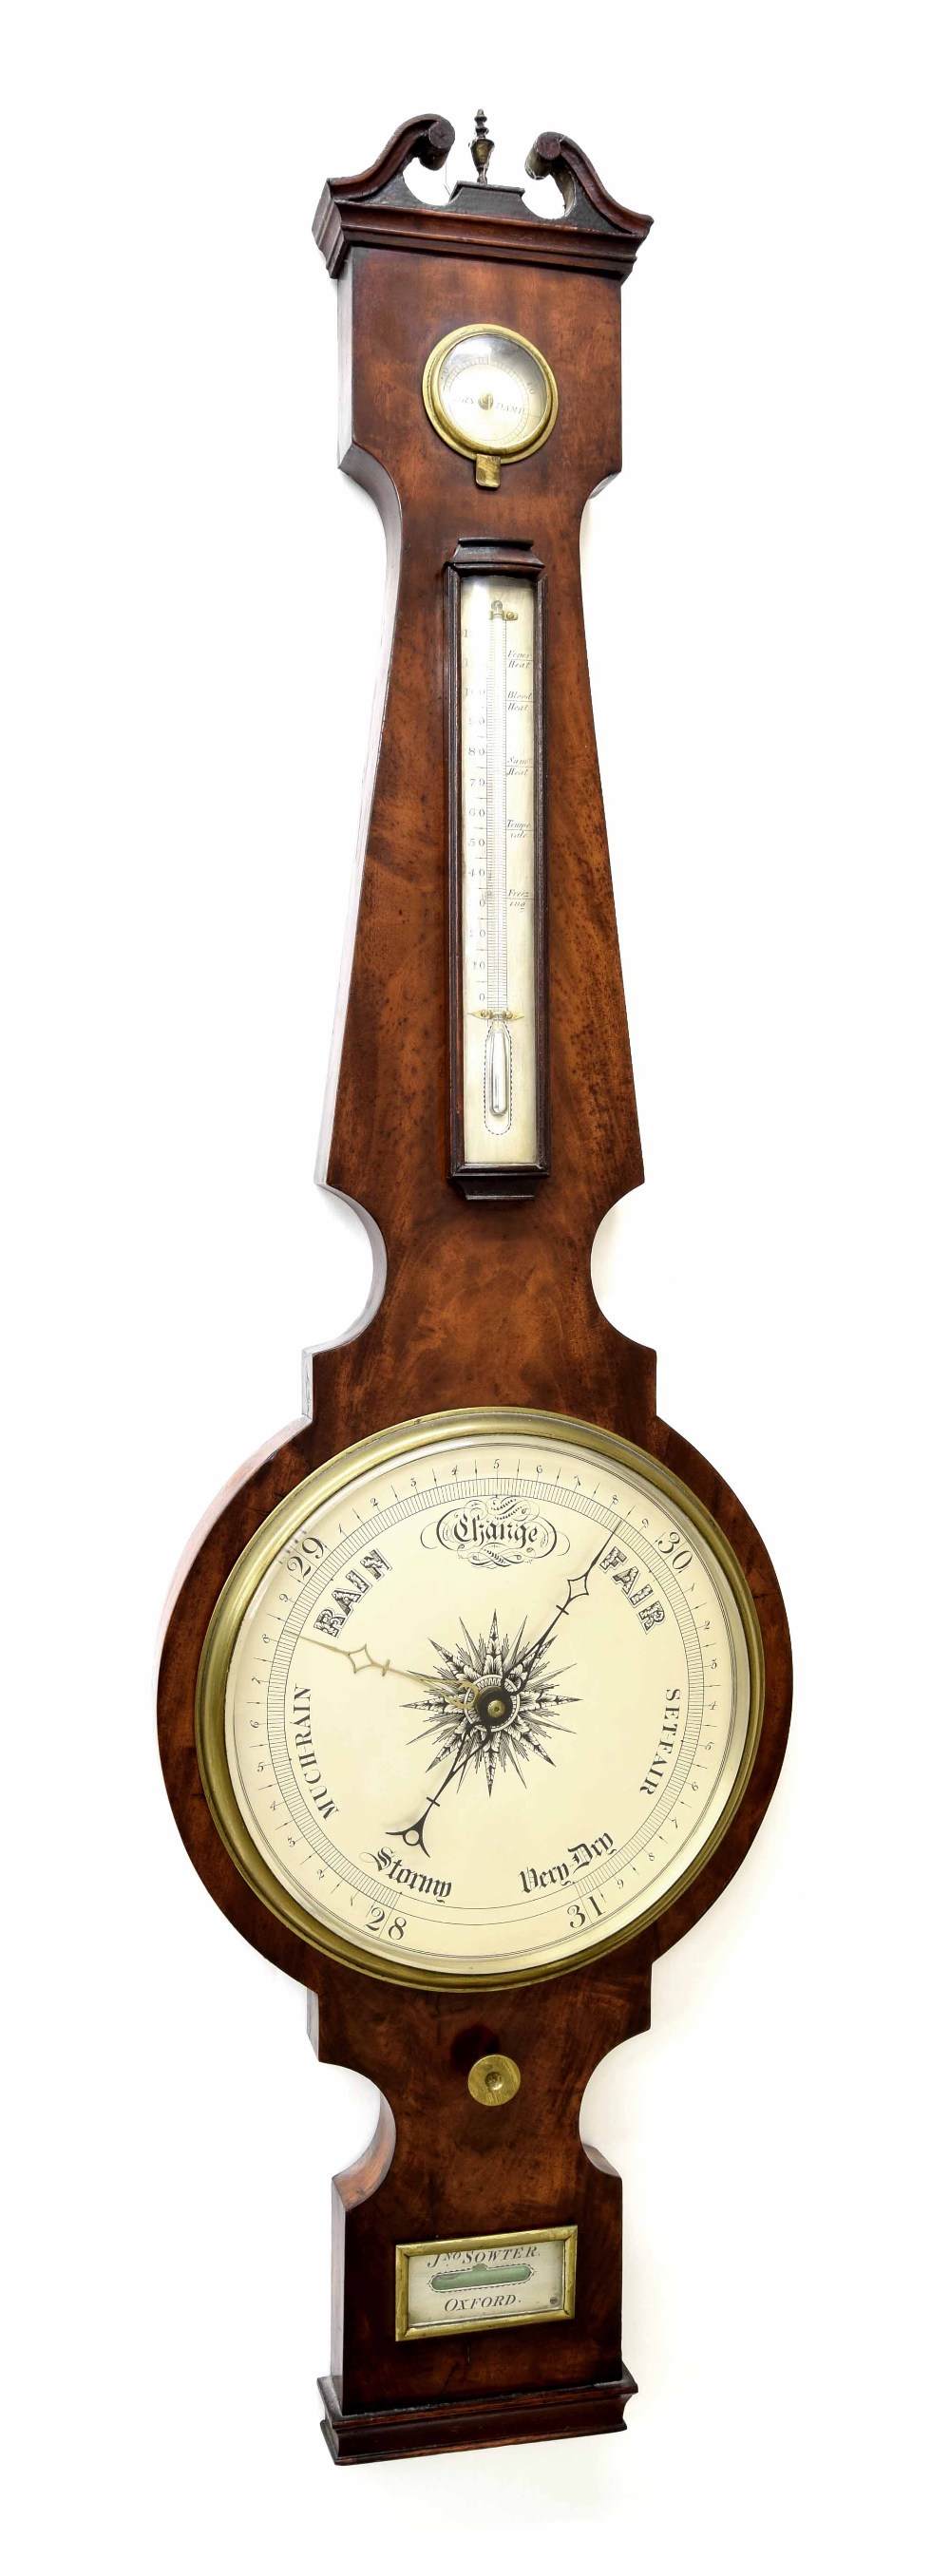 Mahogany four glass banjo barometer signed Jno Sowter, Oxford on the silvered level plate, with